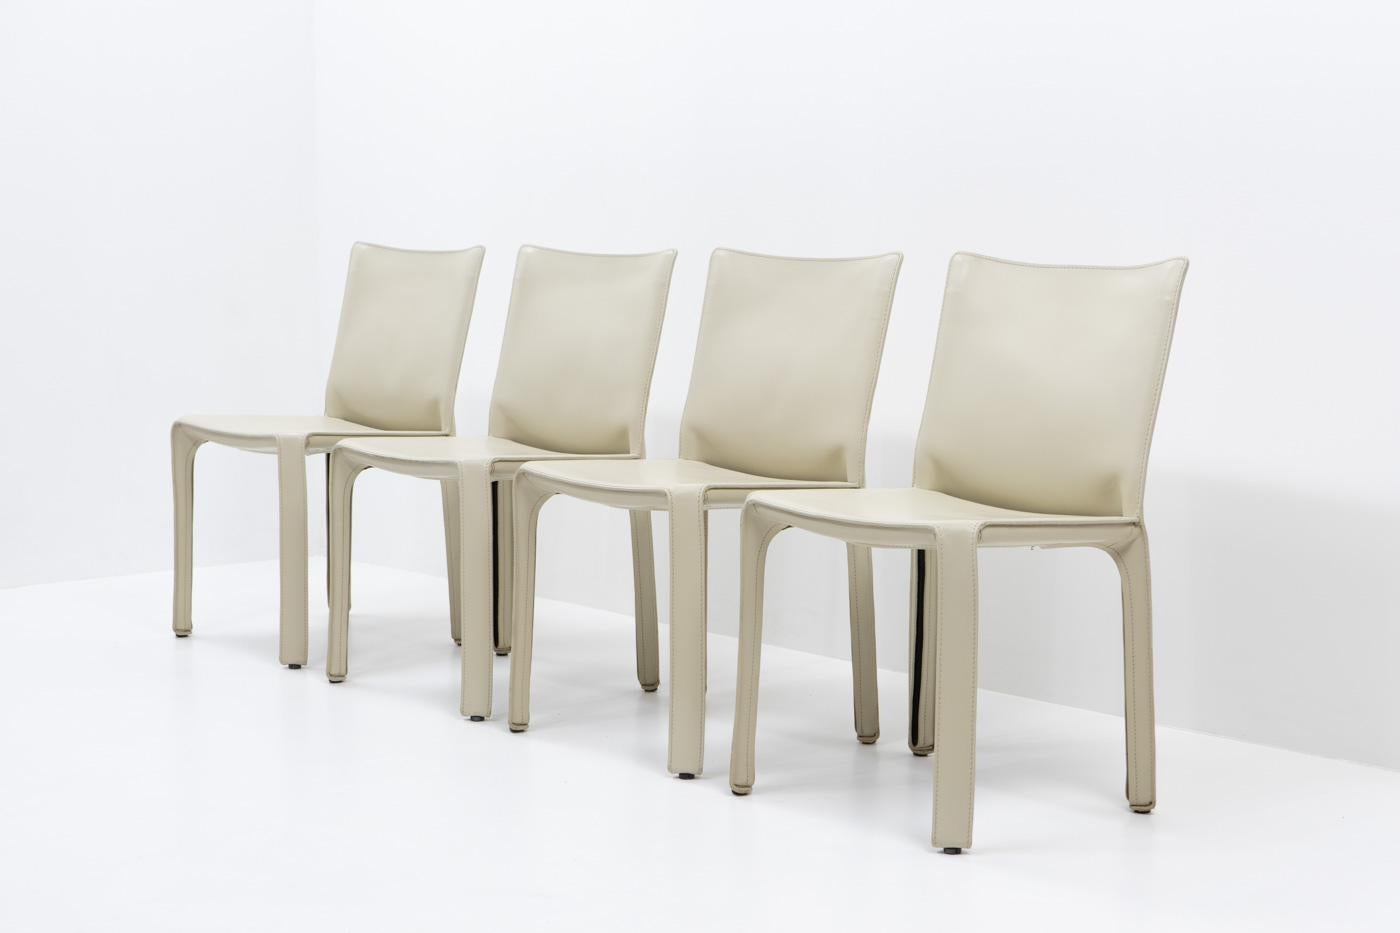 Mid-Century Modern Cab 412 Chairs in Cream Leather by Mario Bellini for Cassina, Set of 4 For Sale